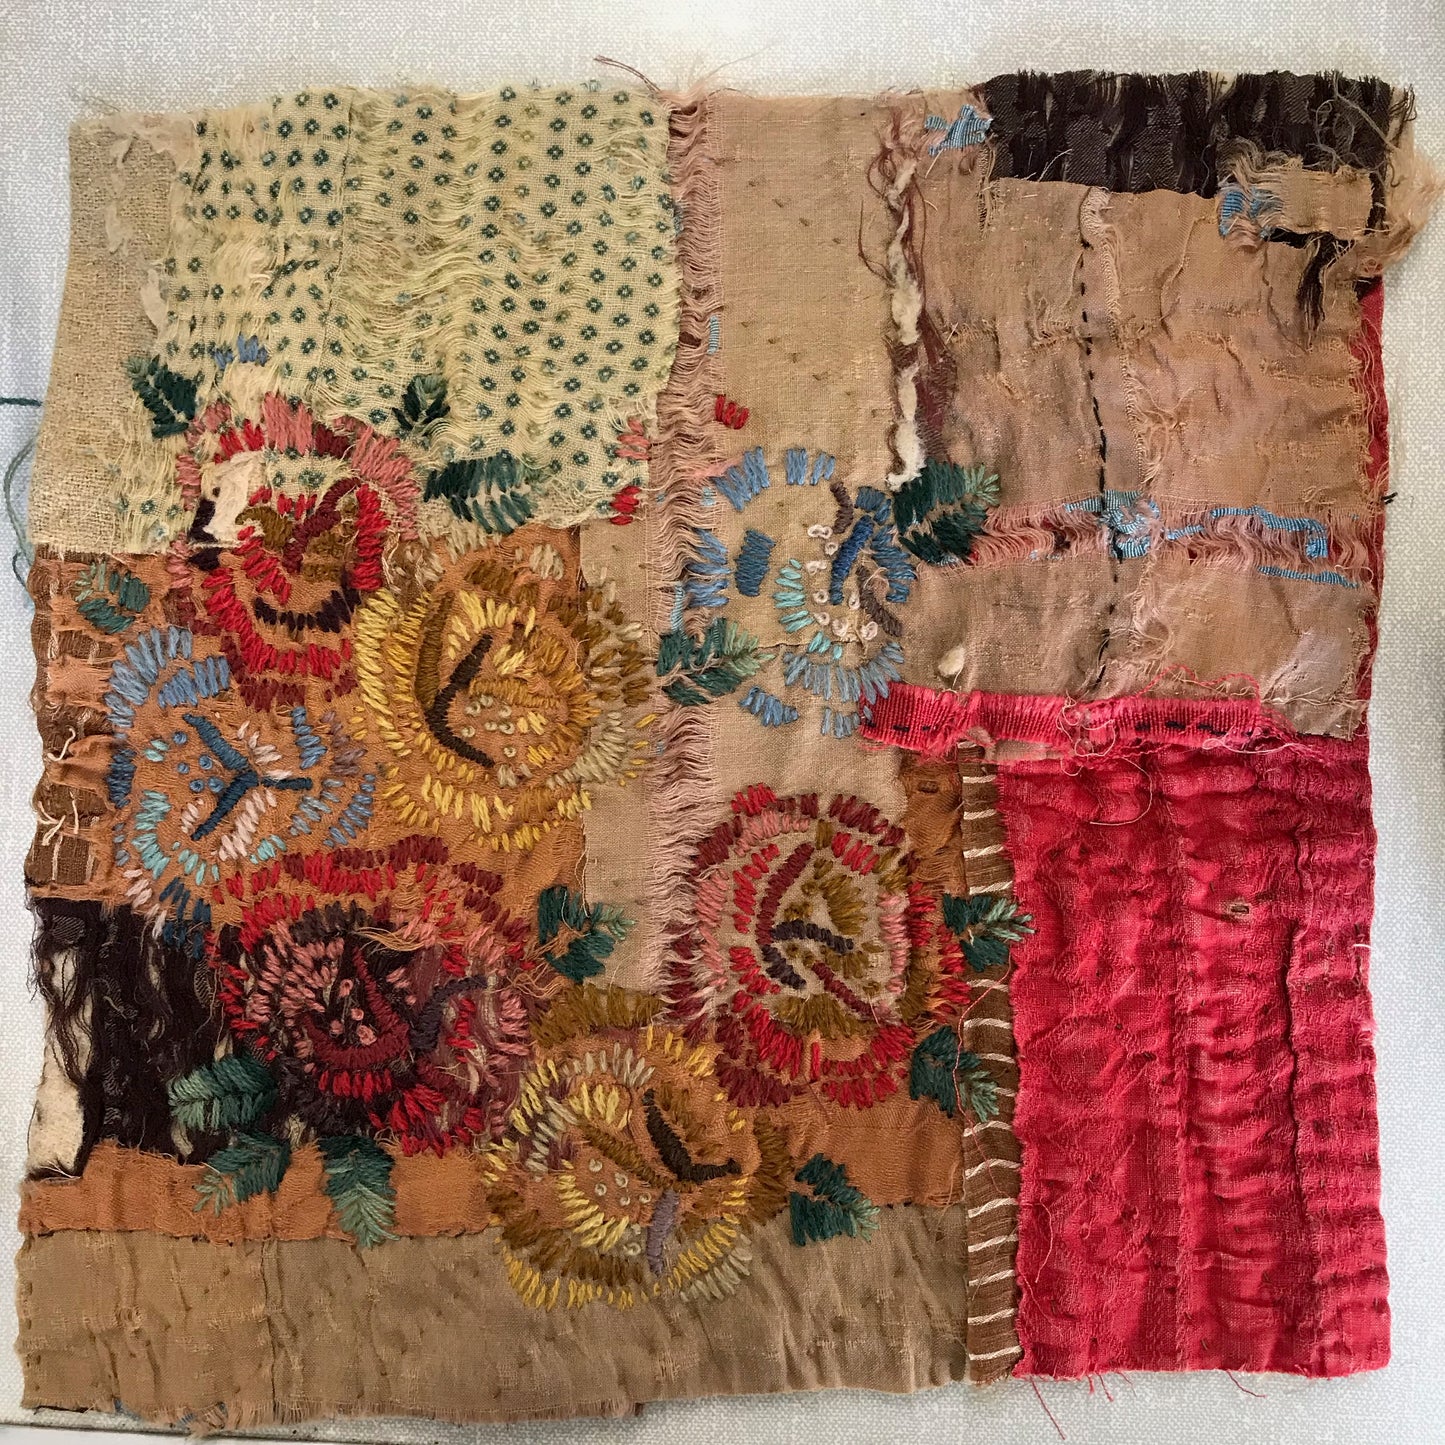 Quilting with Mandy Pattullo, Dorothy Osler, Joanna Hashagen, Abigail Booth and The Quilters' Guild